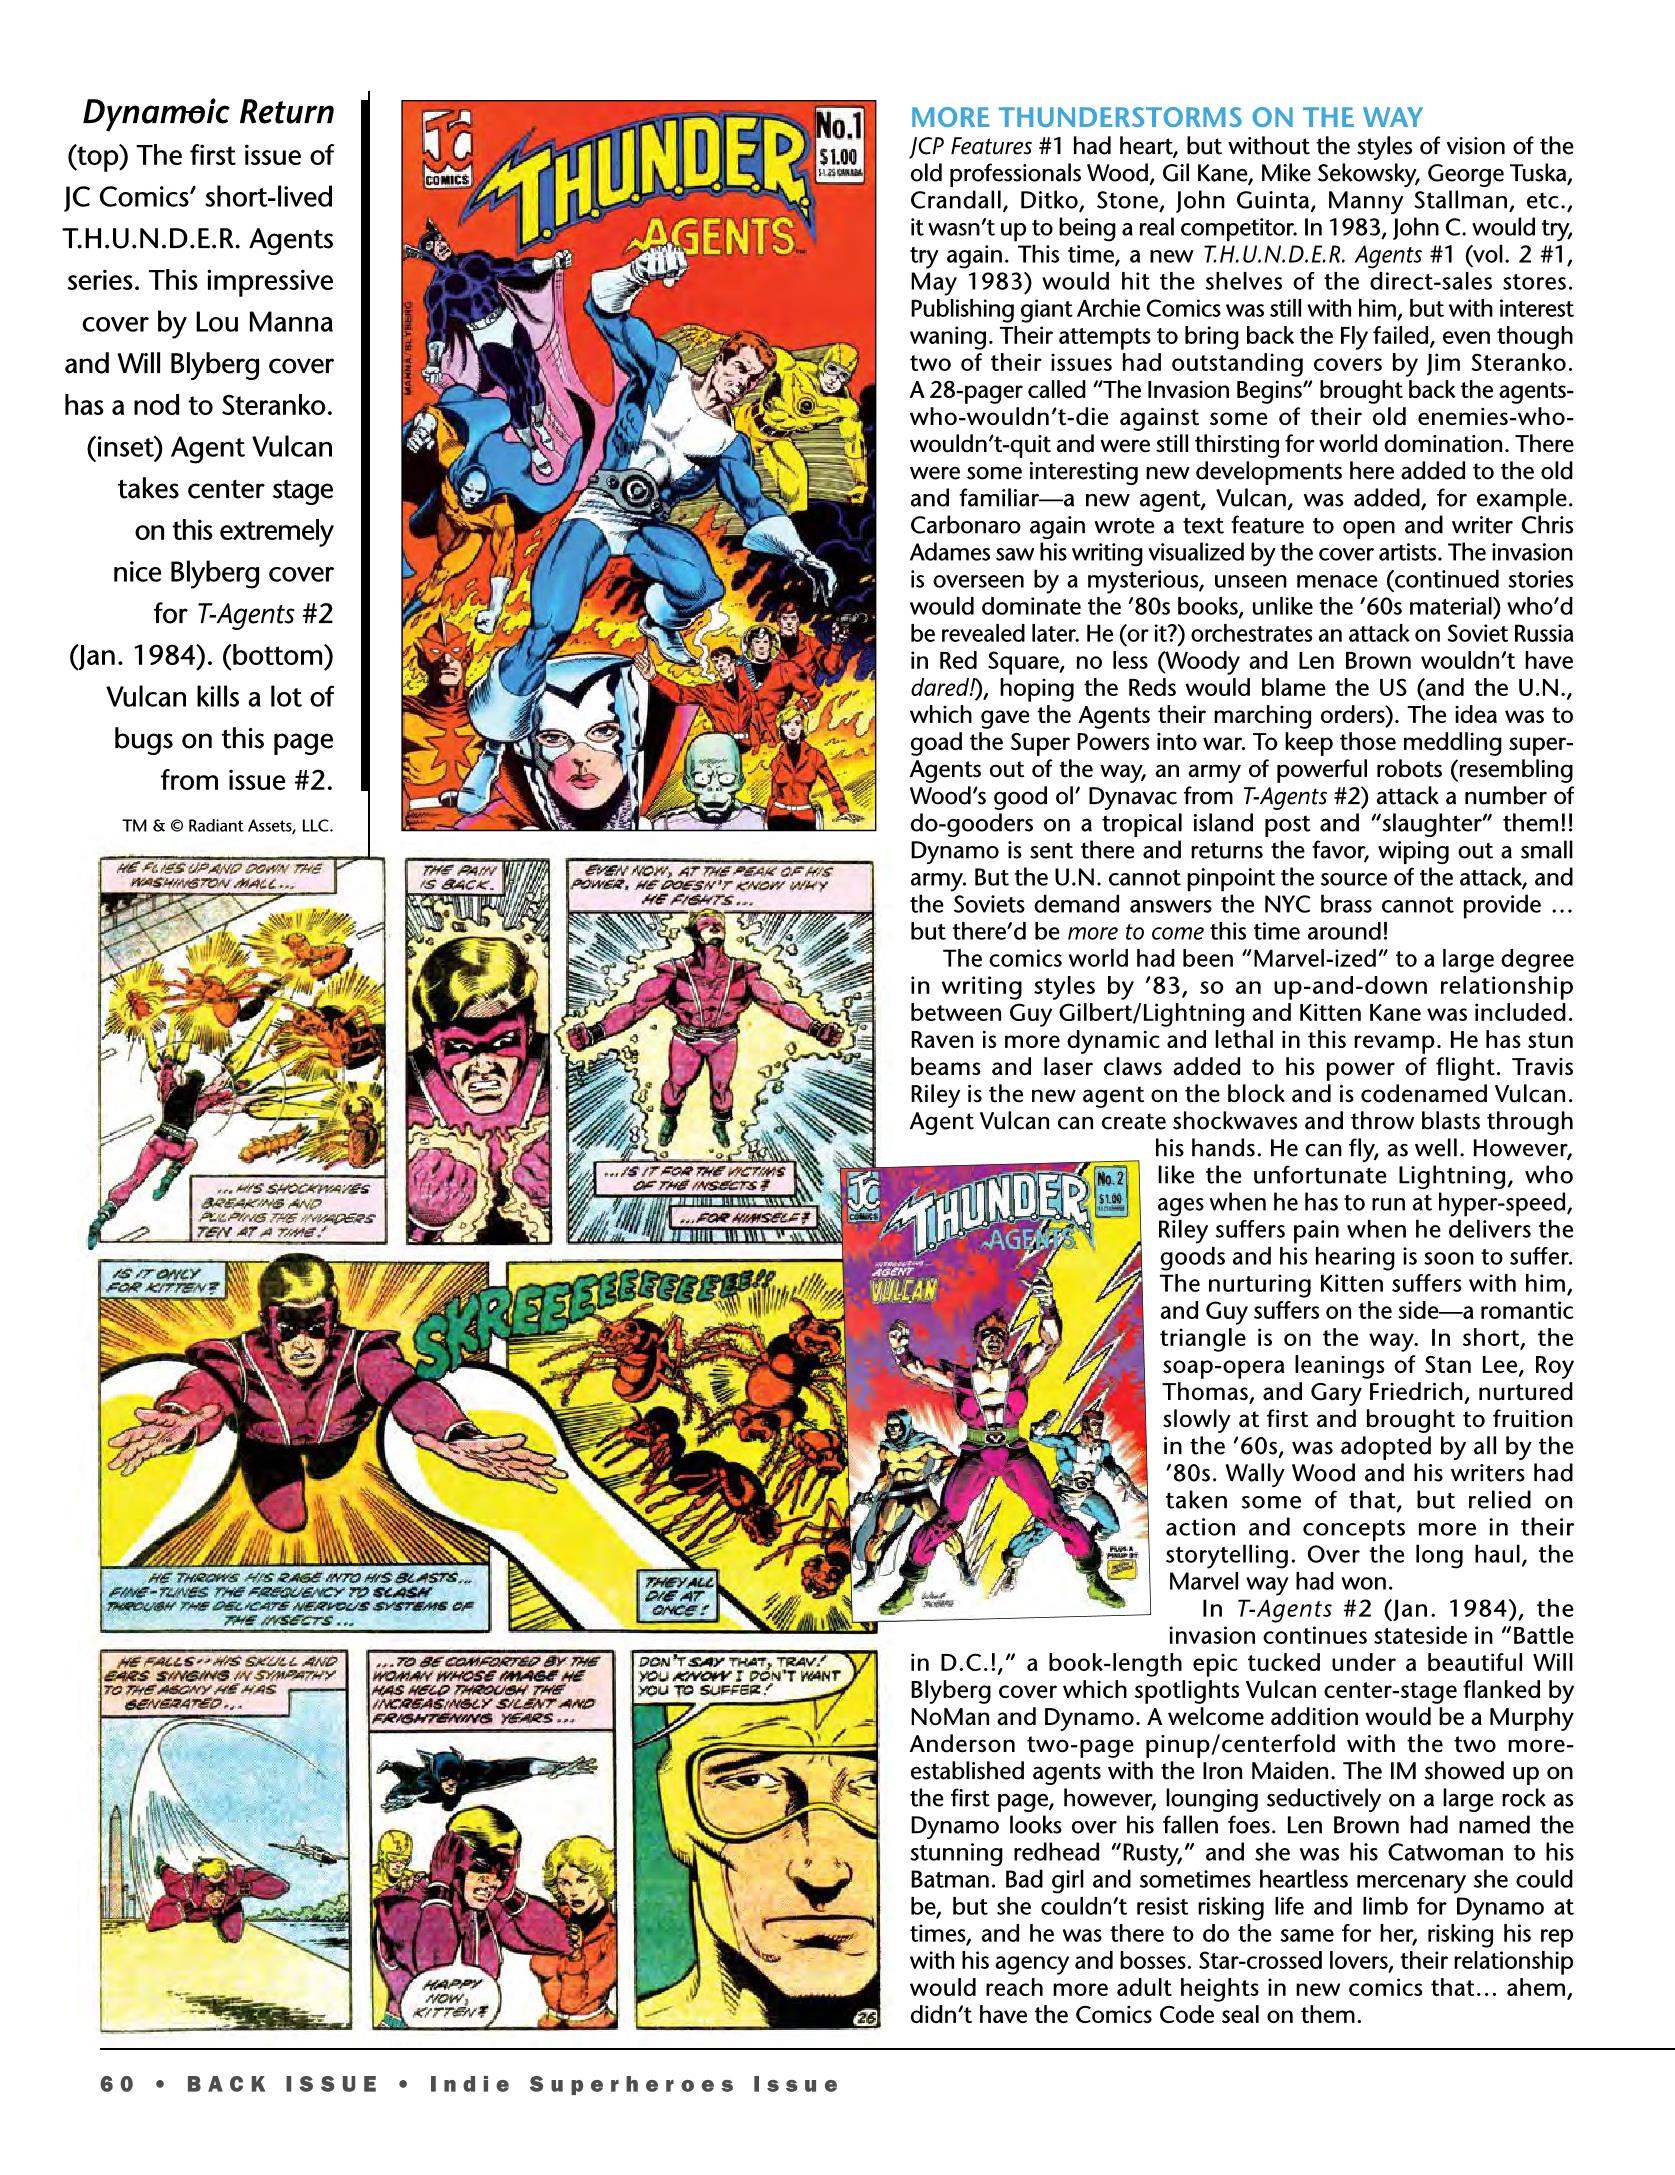 Read online Back Issue comic -  Issue #94 - 59